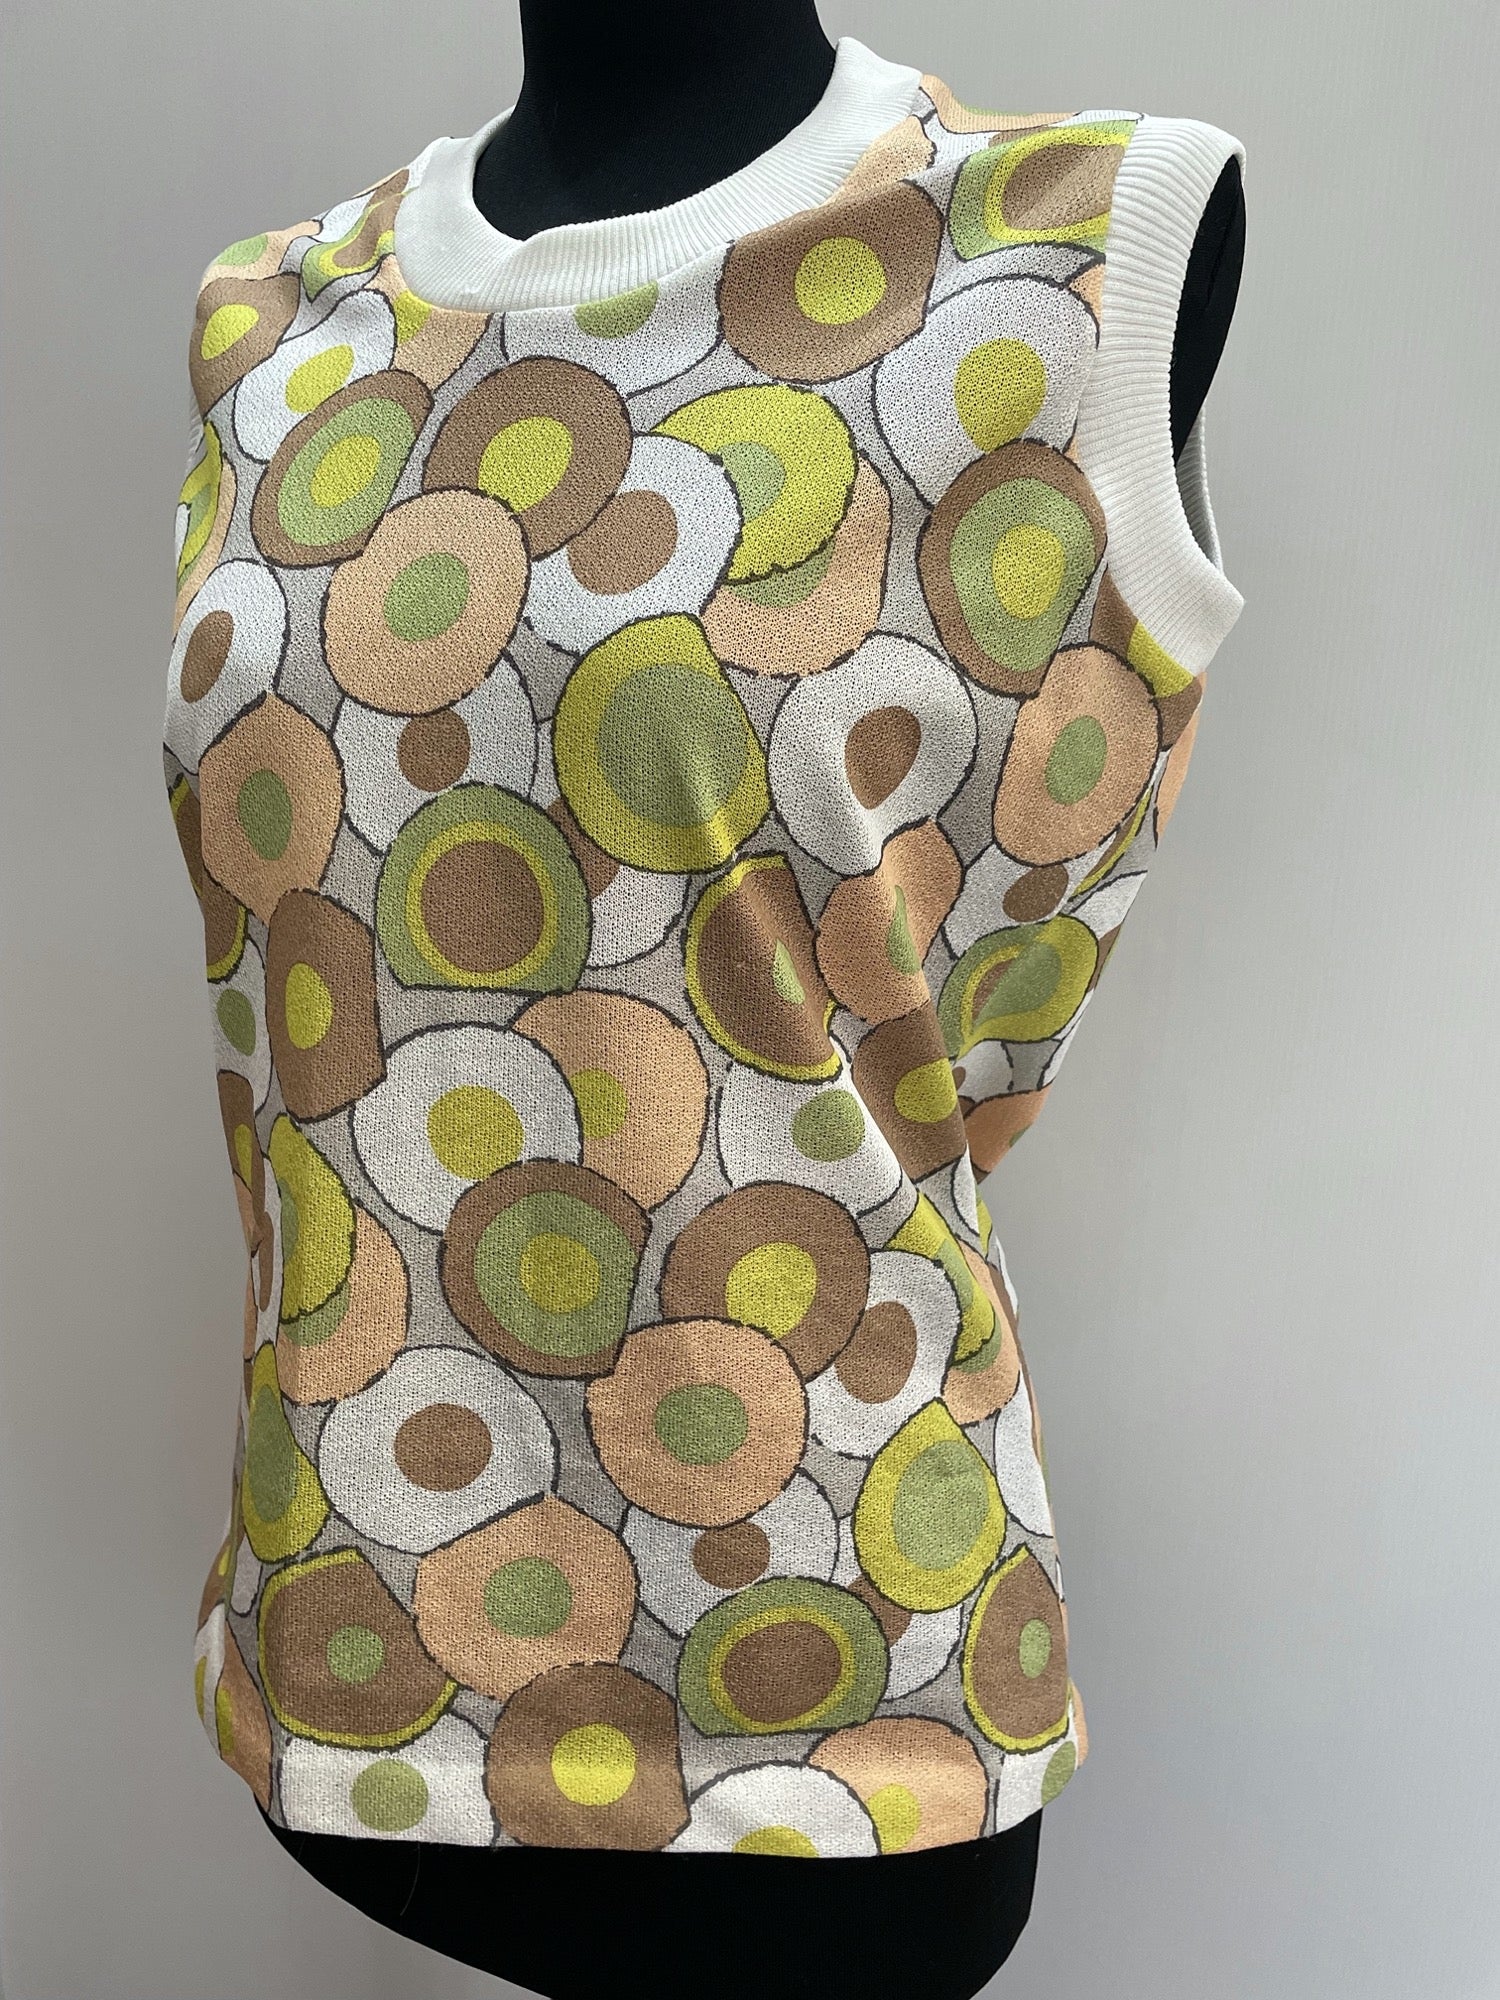 womens top  womens  vintage  vest top  Urban Village Vintage  urban village  tops  top  Tank Top  summer top  sleeveless  marathon  made in england  high neck  Green  full circle  elasticated  crew neck  circle print  circle  60s style  60s  60  1960s  1960  14